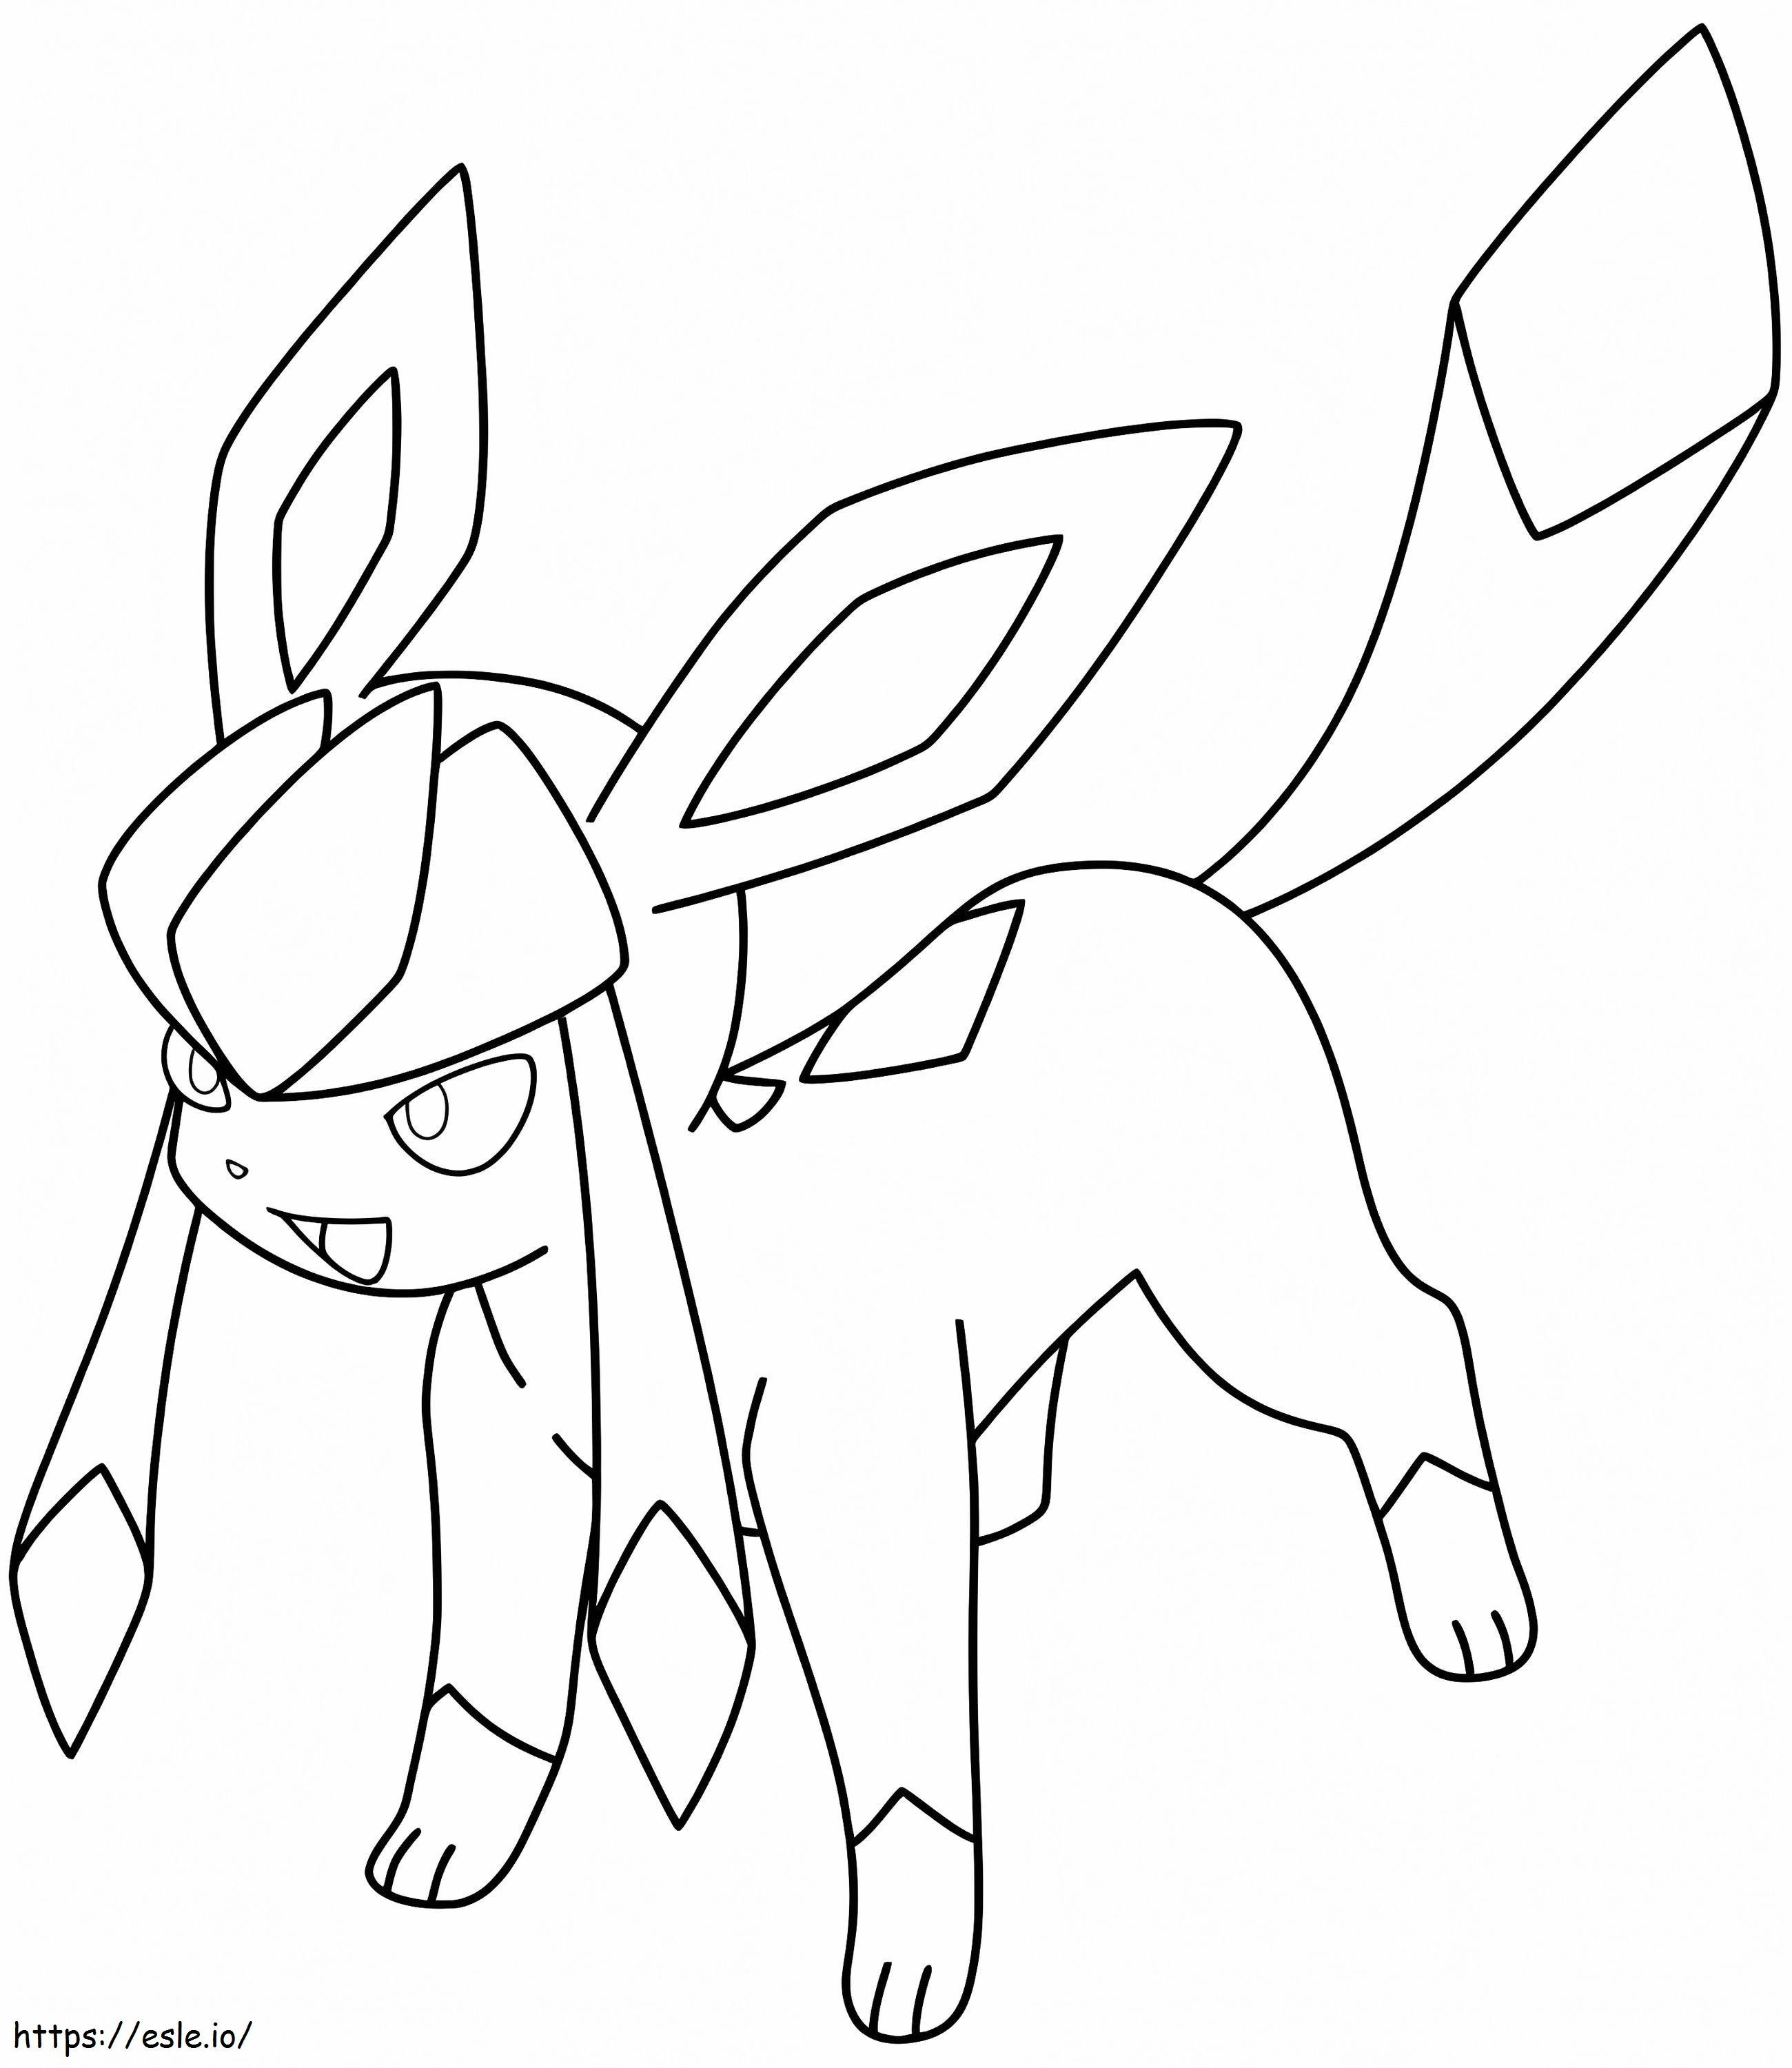 Glaceon 1 coloring page